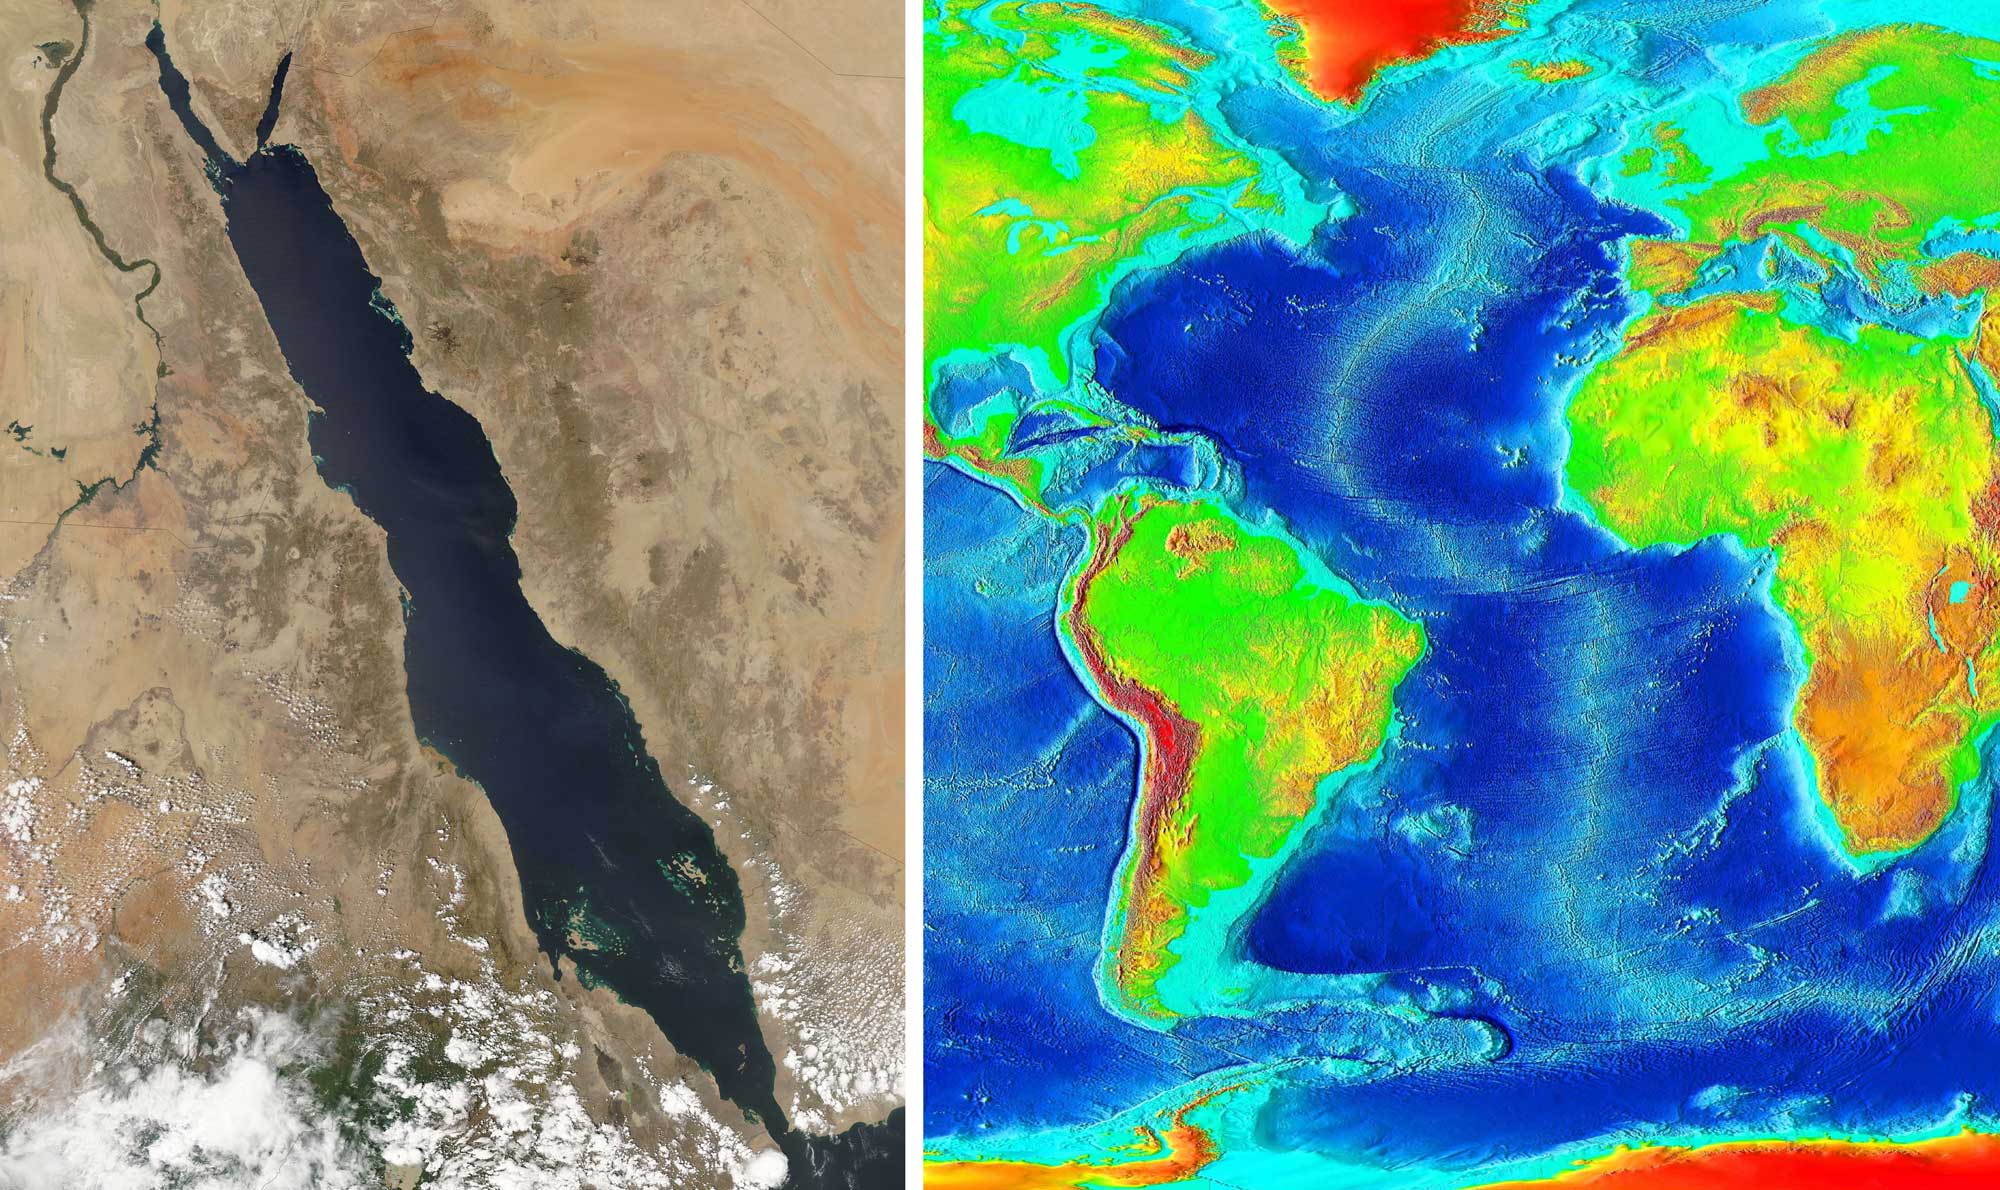 2-Panel image of rift zones. Panel 1: Satellite image of the Red Sea, a narrow sea that formed in a rifted area. Panel 2: False-color image of the Atlantic ocean showing the mid-Atlantic ridge running between the Americas and Greenland in the west and Europe and Africa in the east. Iceland sits on the ridge.